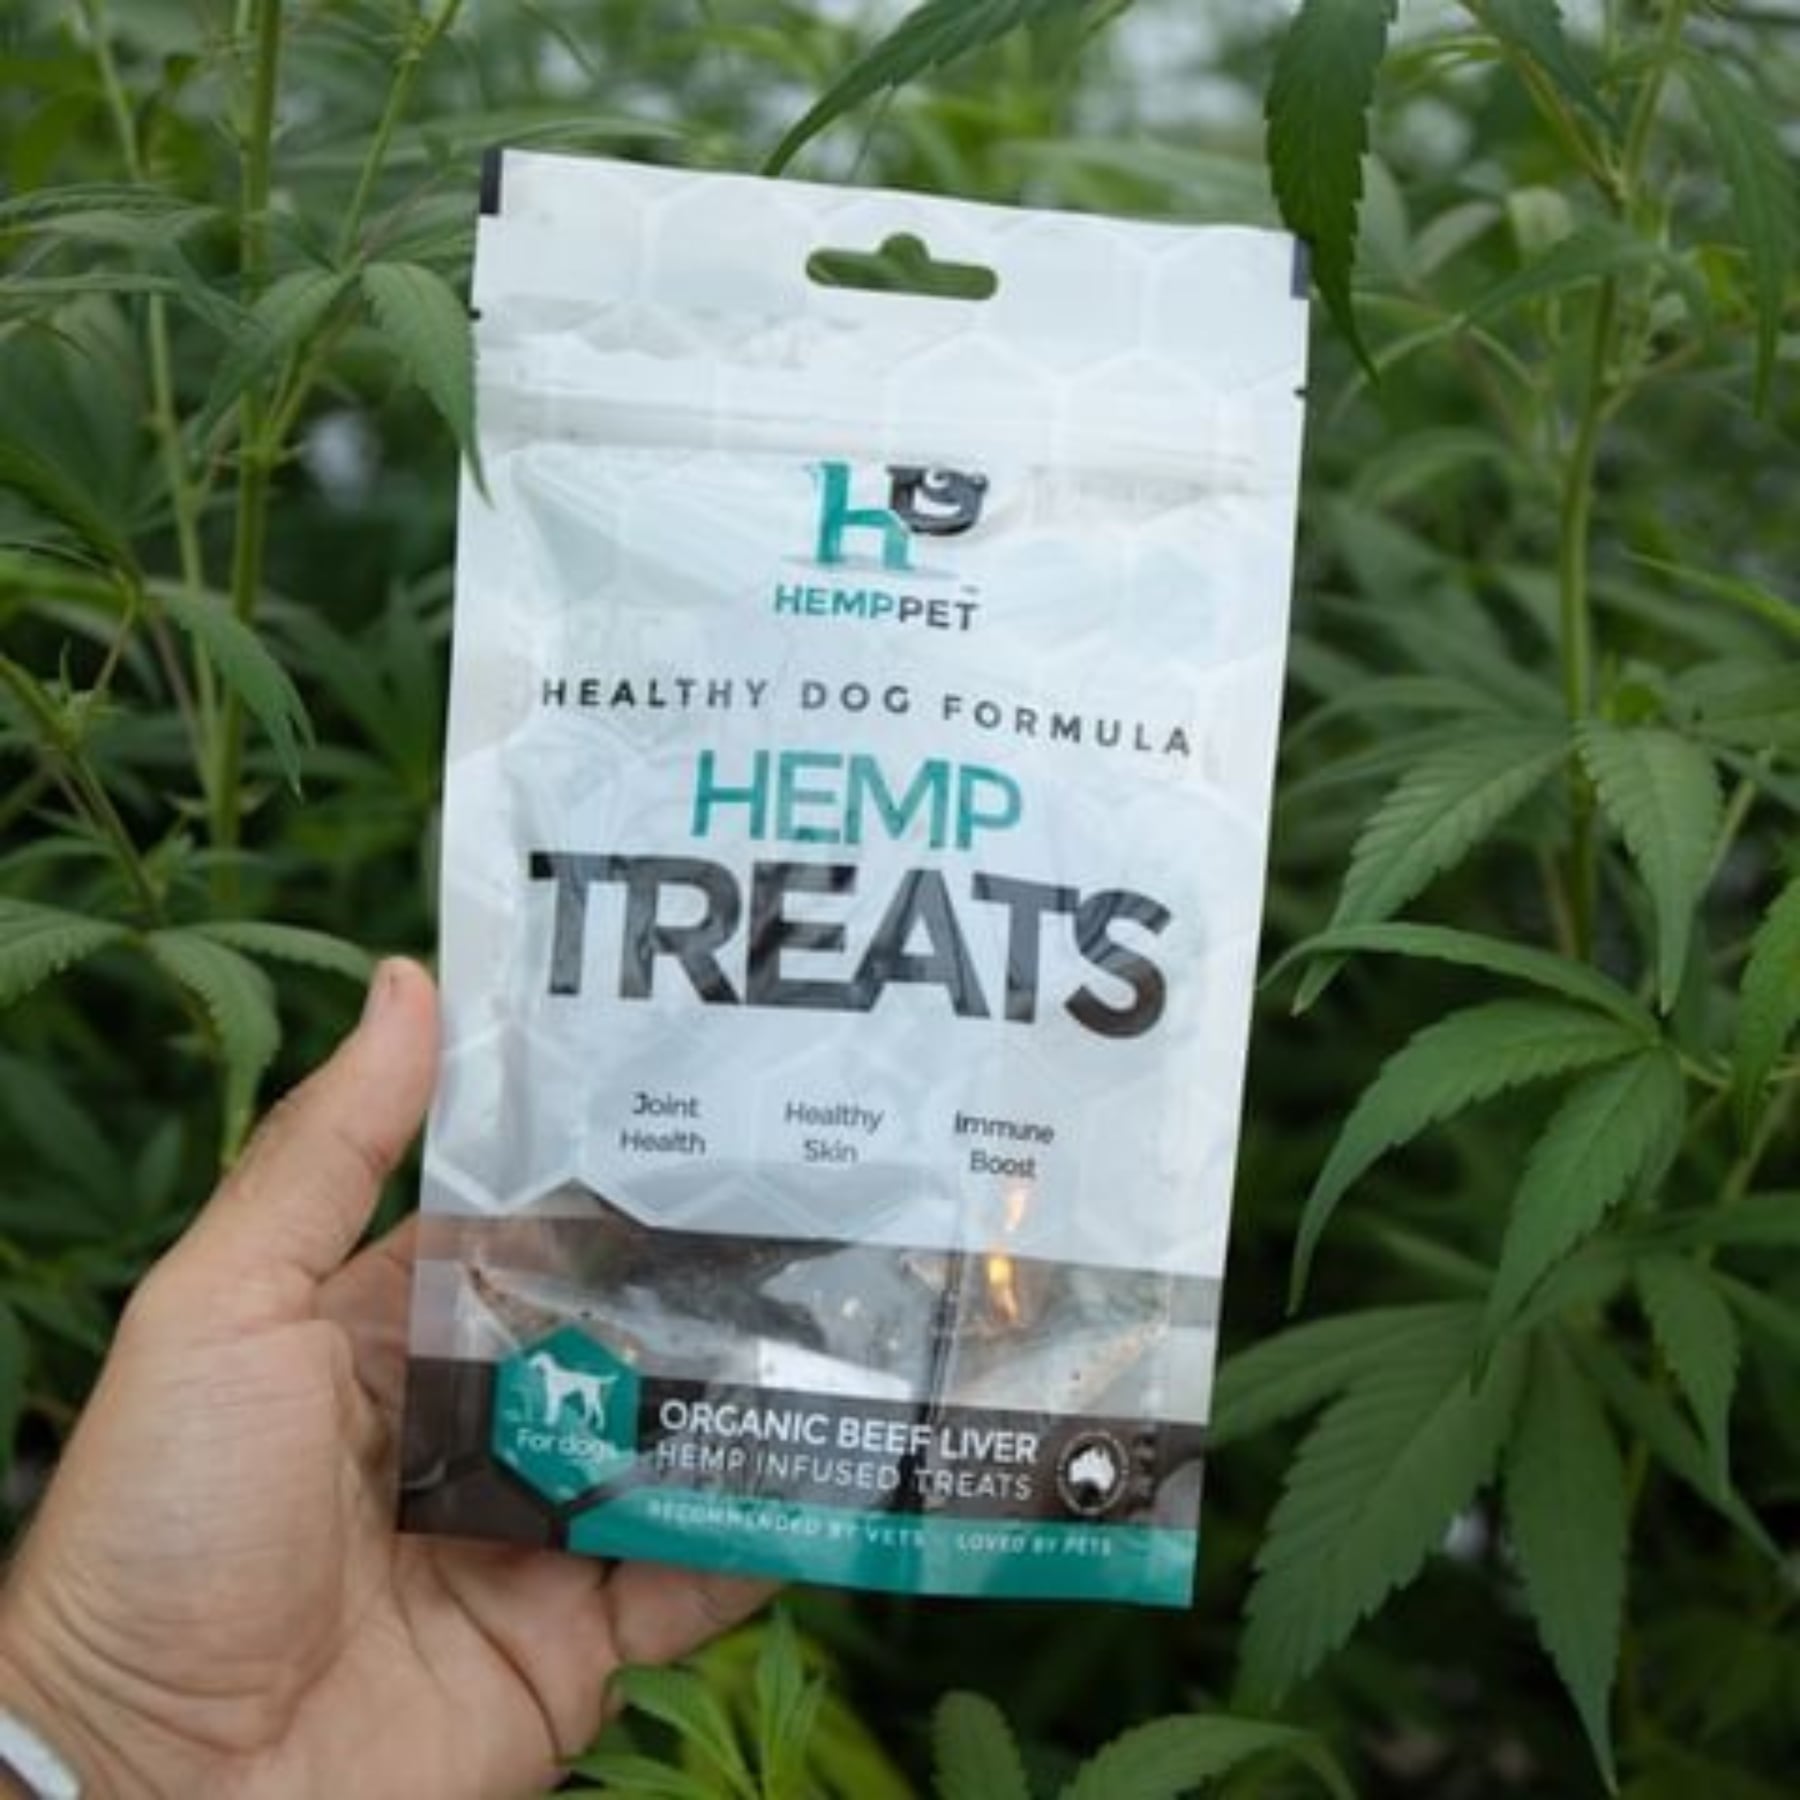 HEMP PET Infused Organic Beef Liver Treats for Dogs. Recommended by Vets